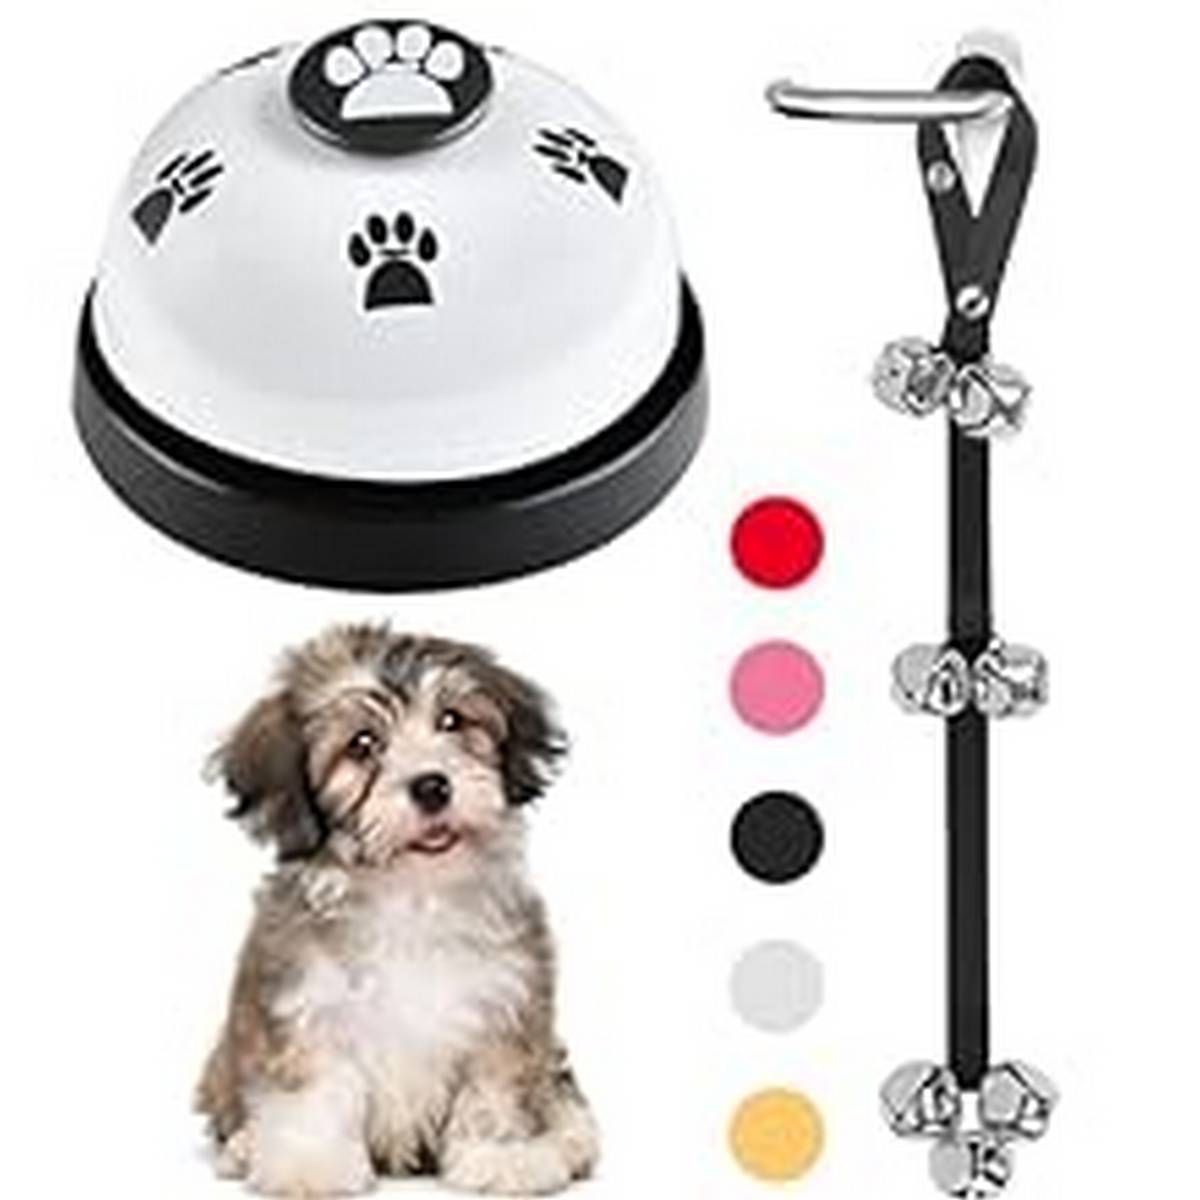 Supplies_KEXIAVA Pack Dog Bells Puppy Potty Training Bell Dog Doorbell Potty Train Dog Bell for Potty Training Door Bells for Dogs to Ring to Go Outside Jingle Bells for Door Knob